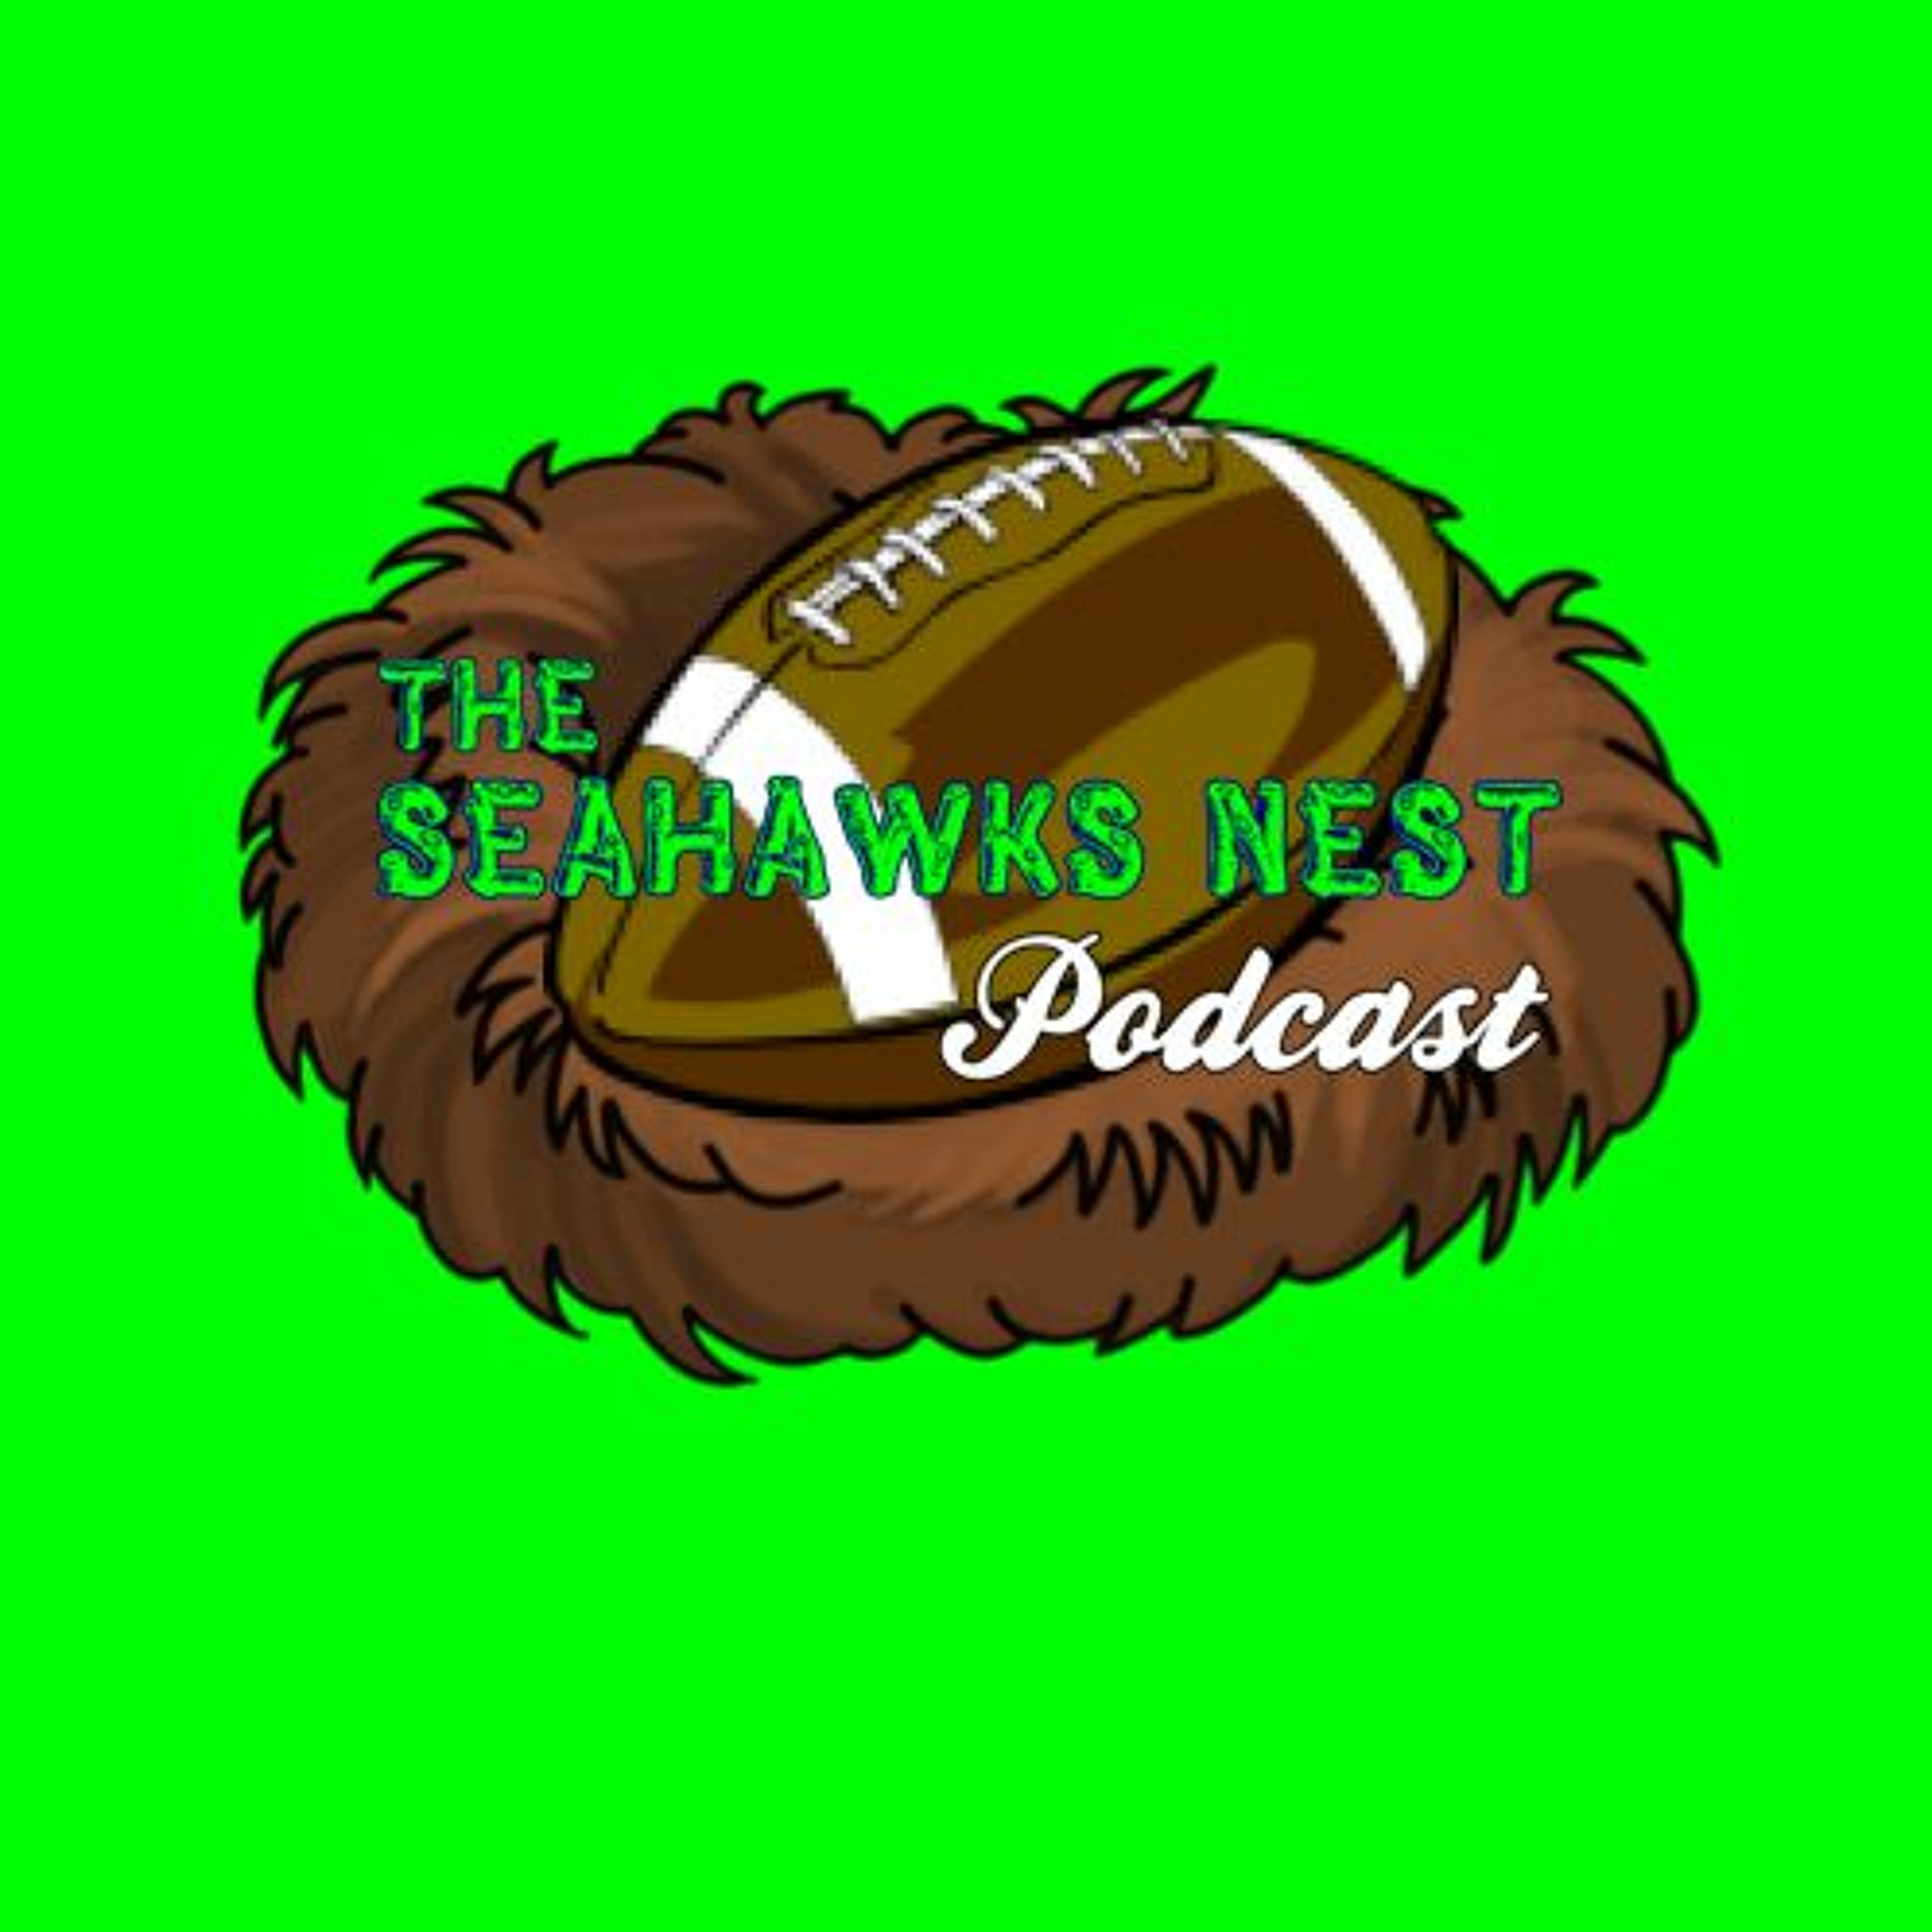 Episode 406 - Seahawks at Bengals